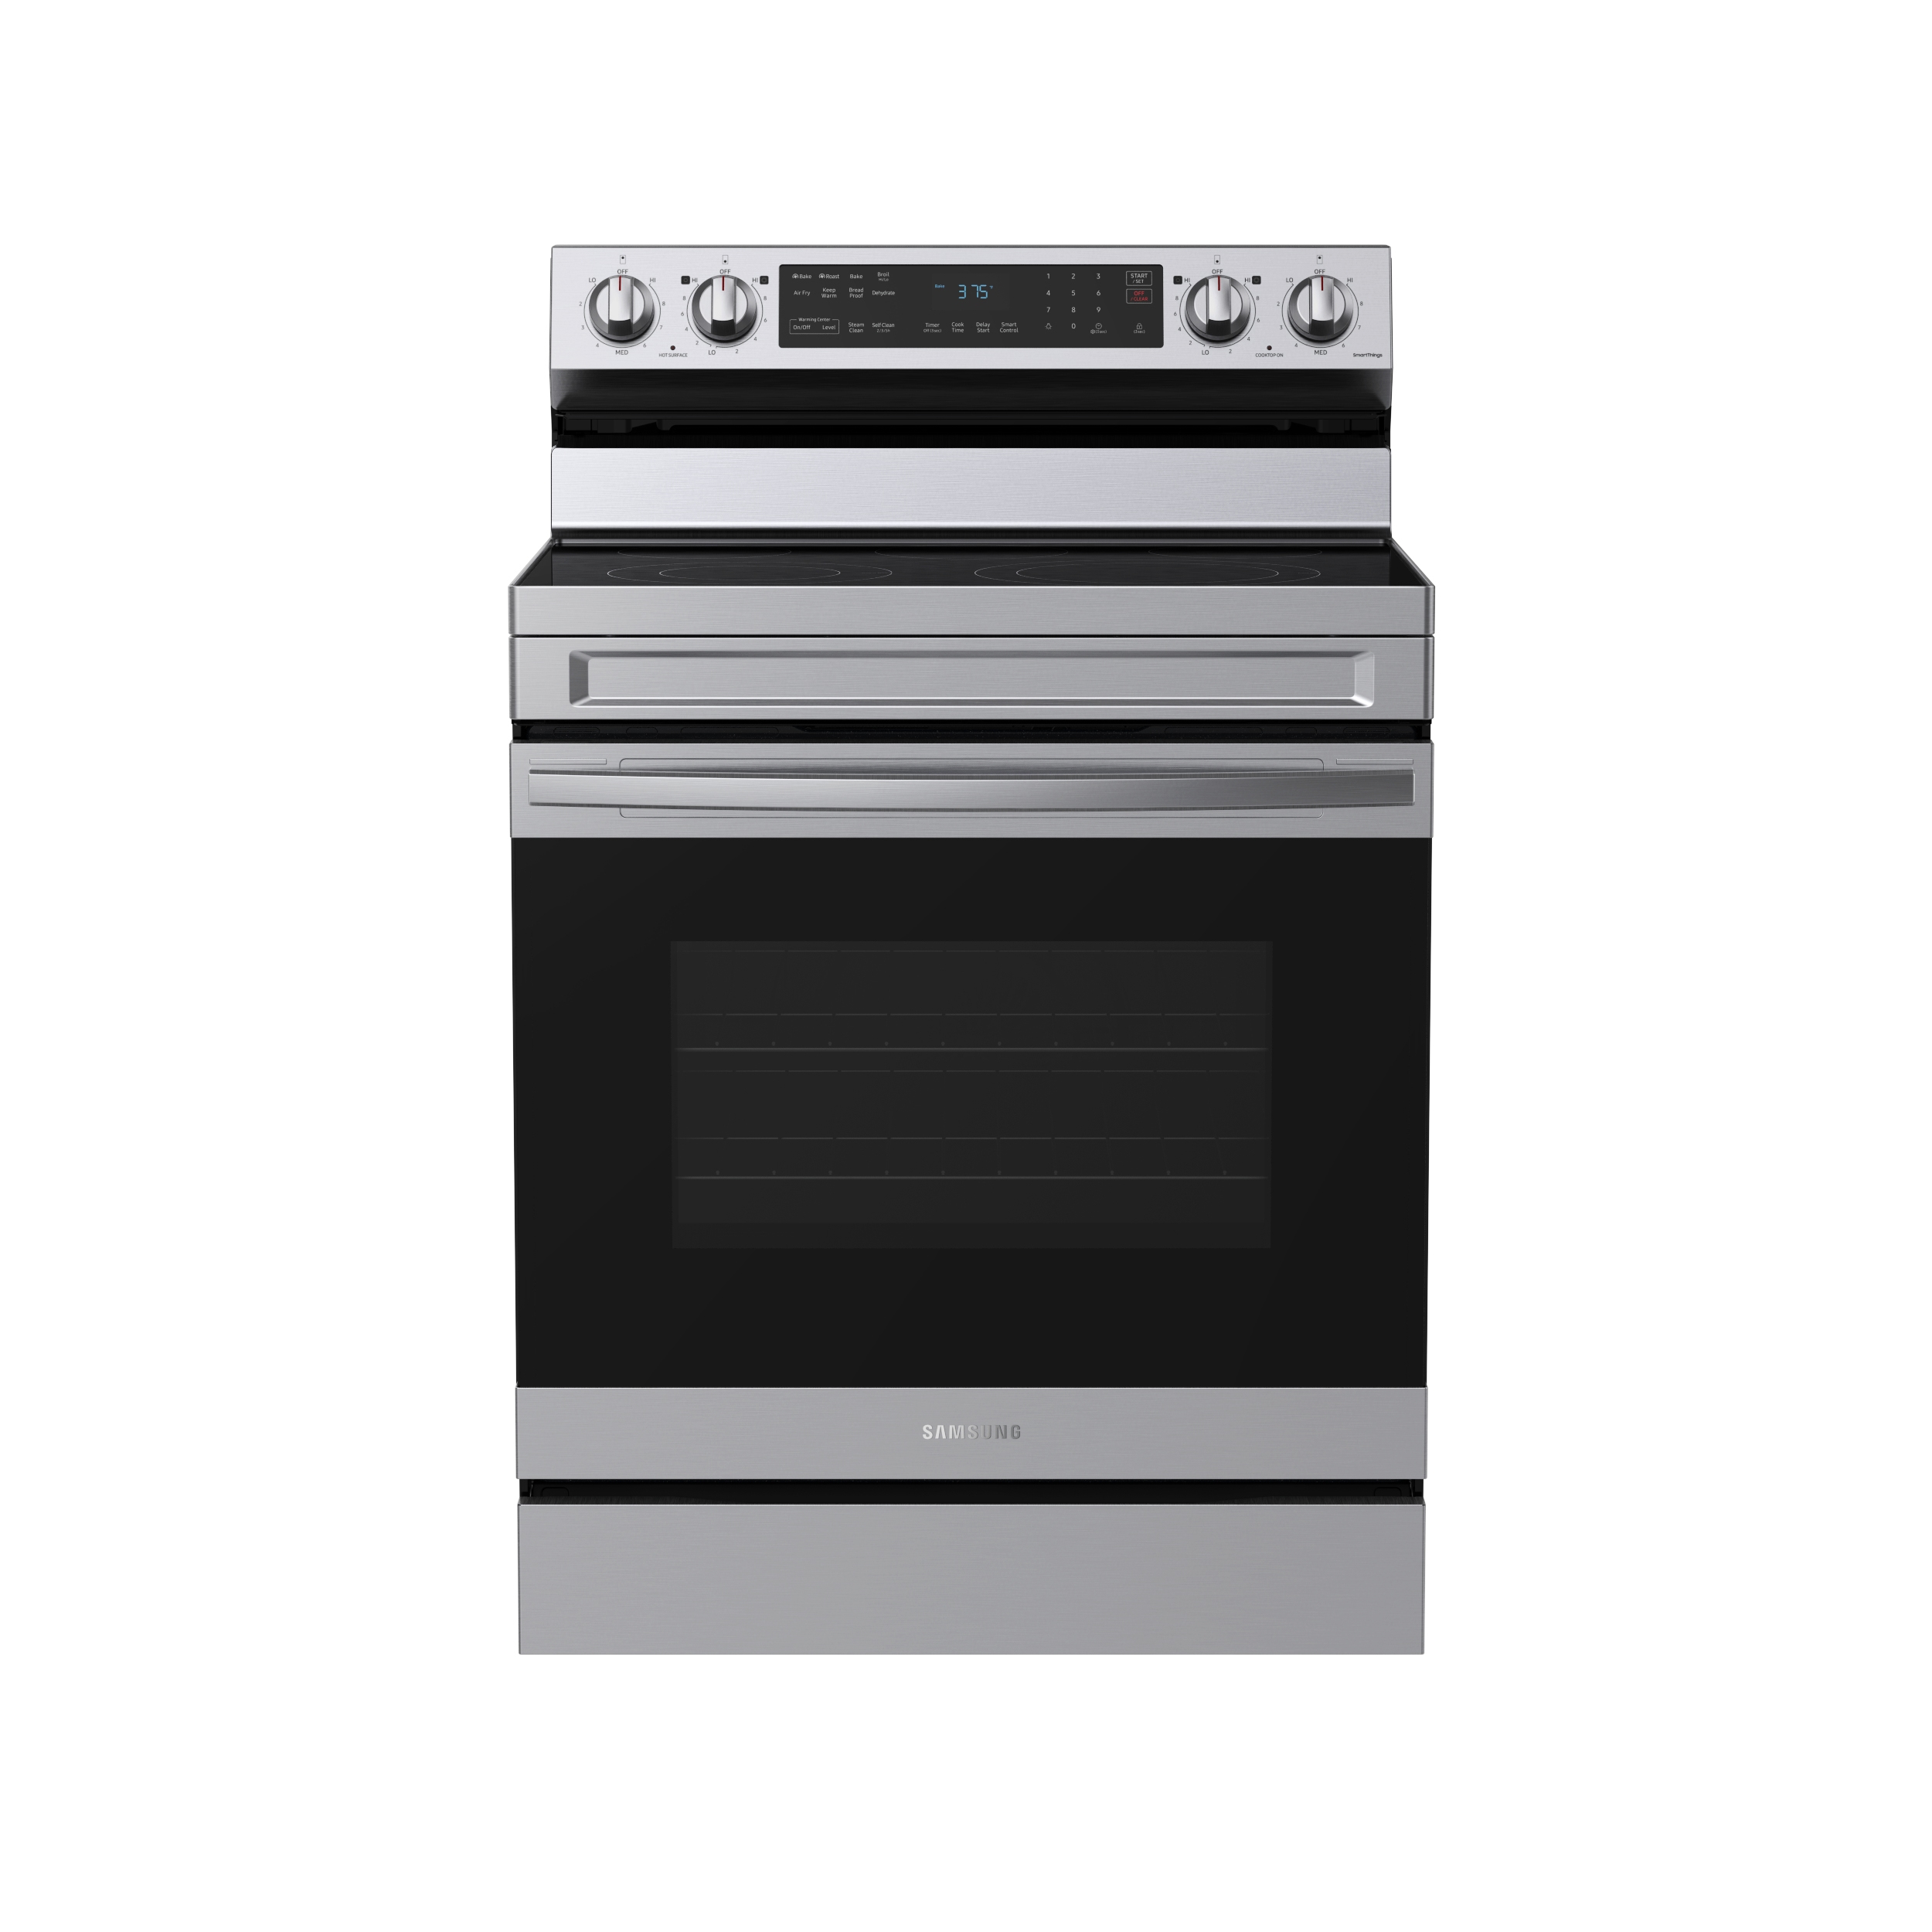 6.3 cu. ft. Smart Freestanding Electric Range with No-Preheat Air Fry &  Convection in Stainless Steel Ranges - NE63A6511SS/AA